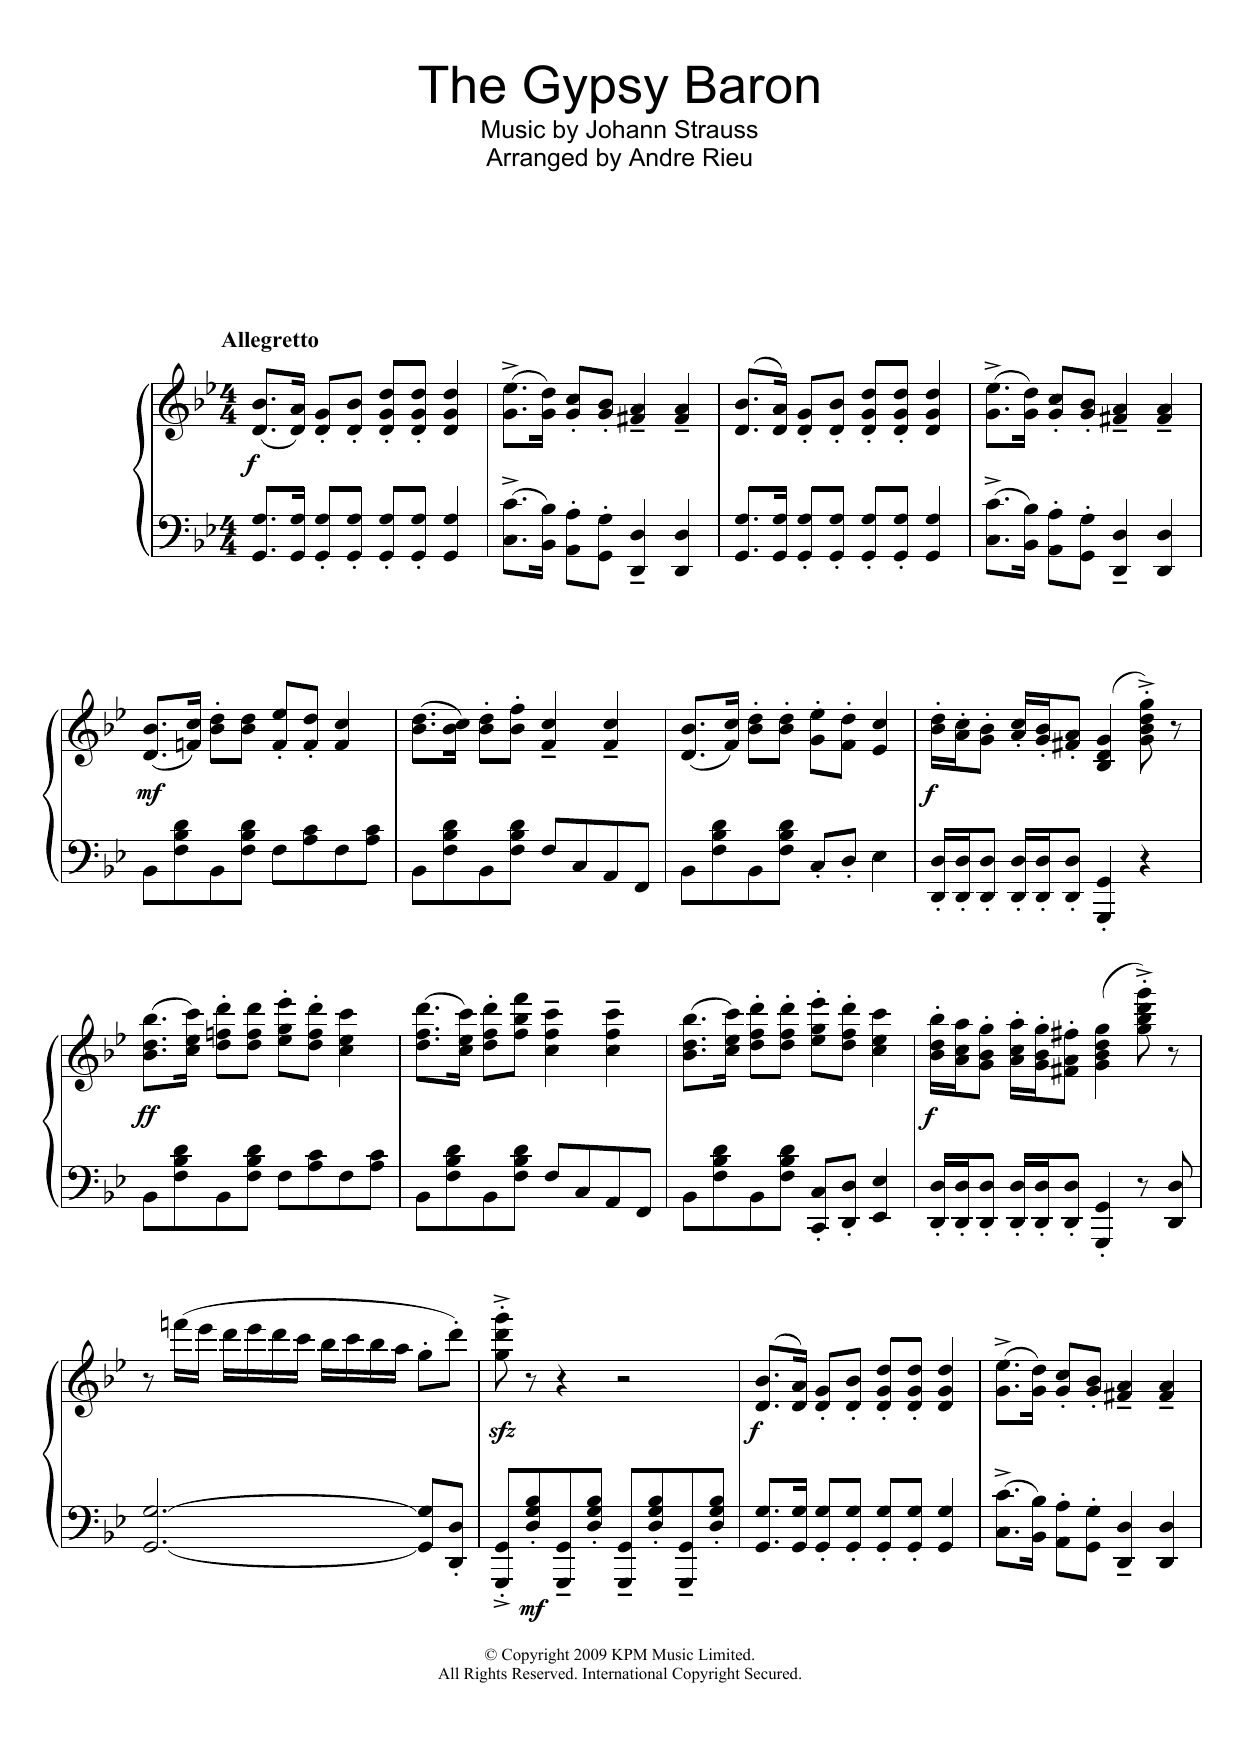 Andre Rieu The Gypsy Baron sheet music notes and chords. Download Printable PDF.